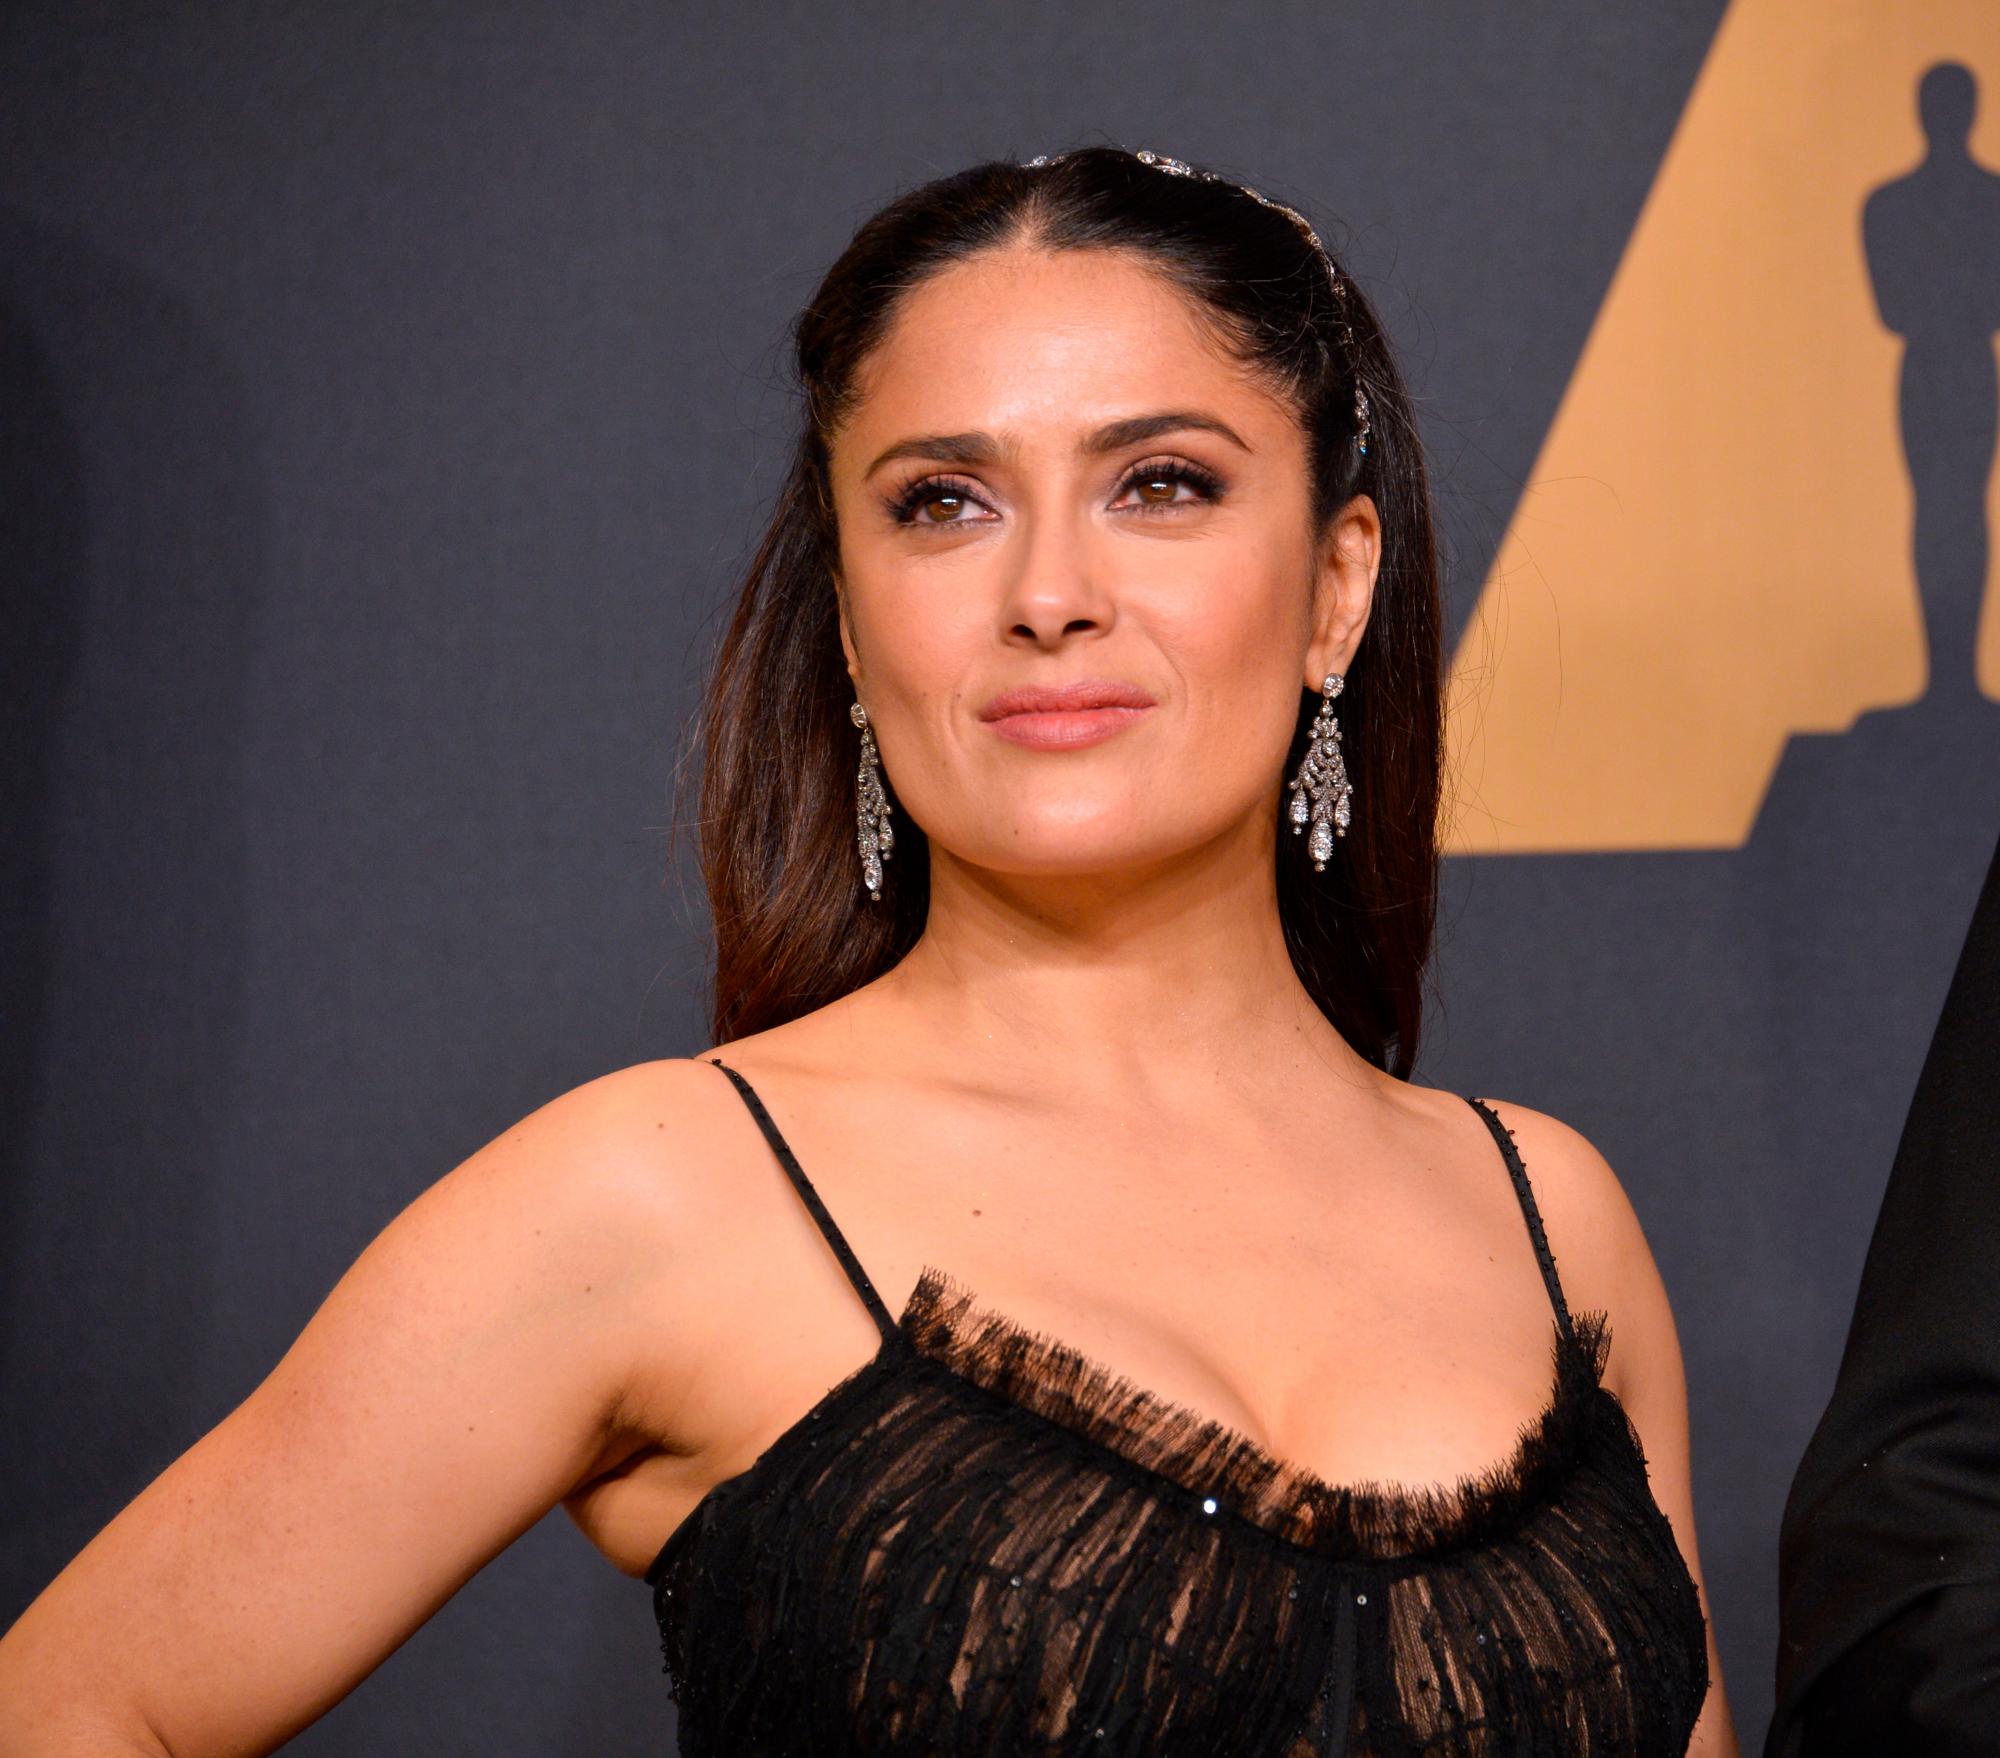 For over 12 years and up to 50 years, Salma Hayek has suffered from complicated complications